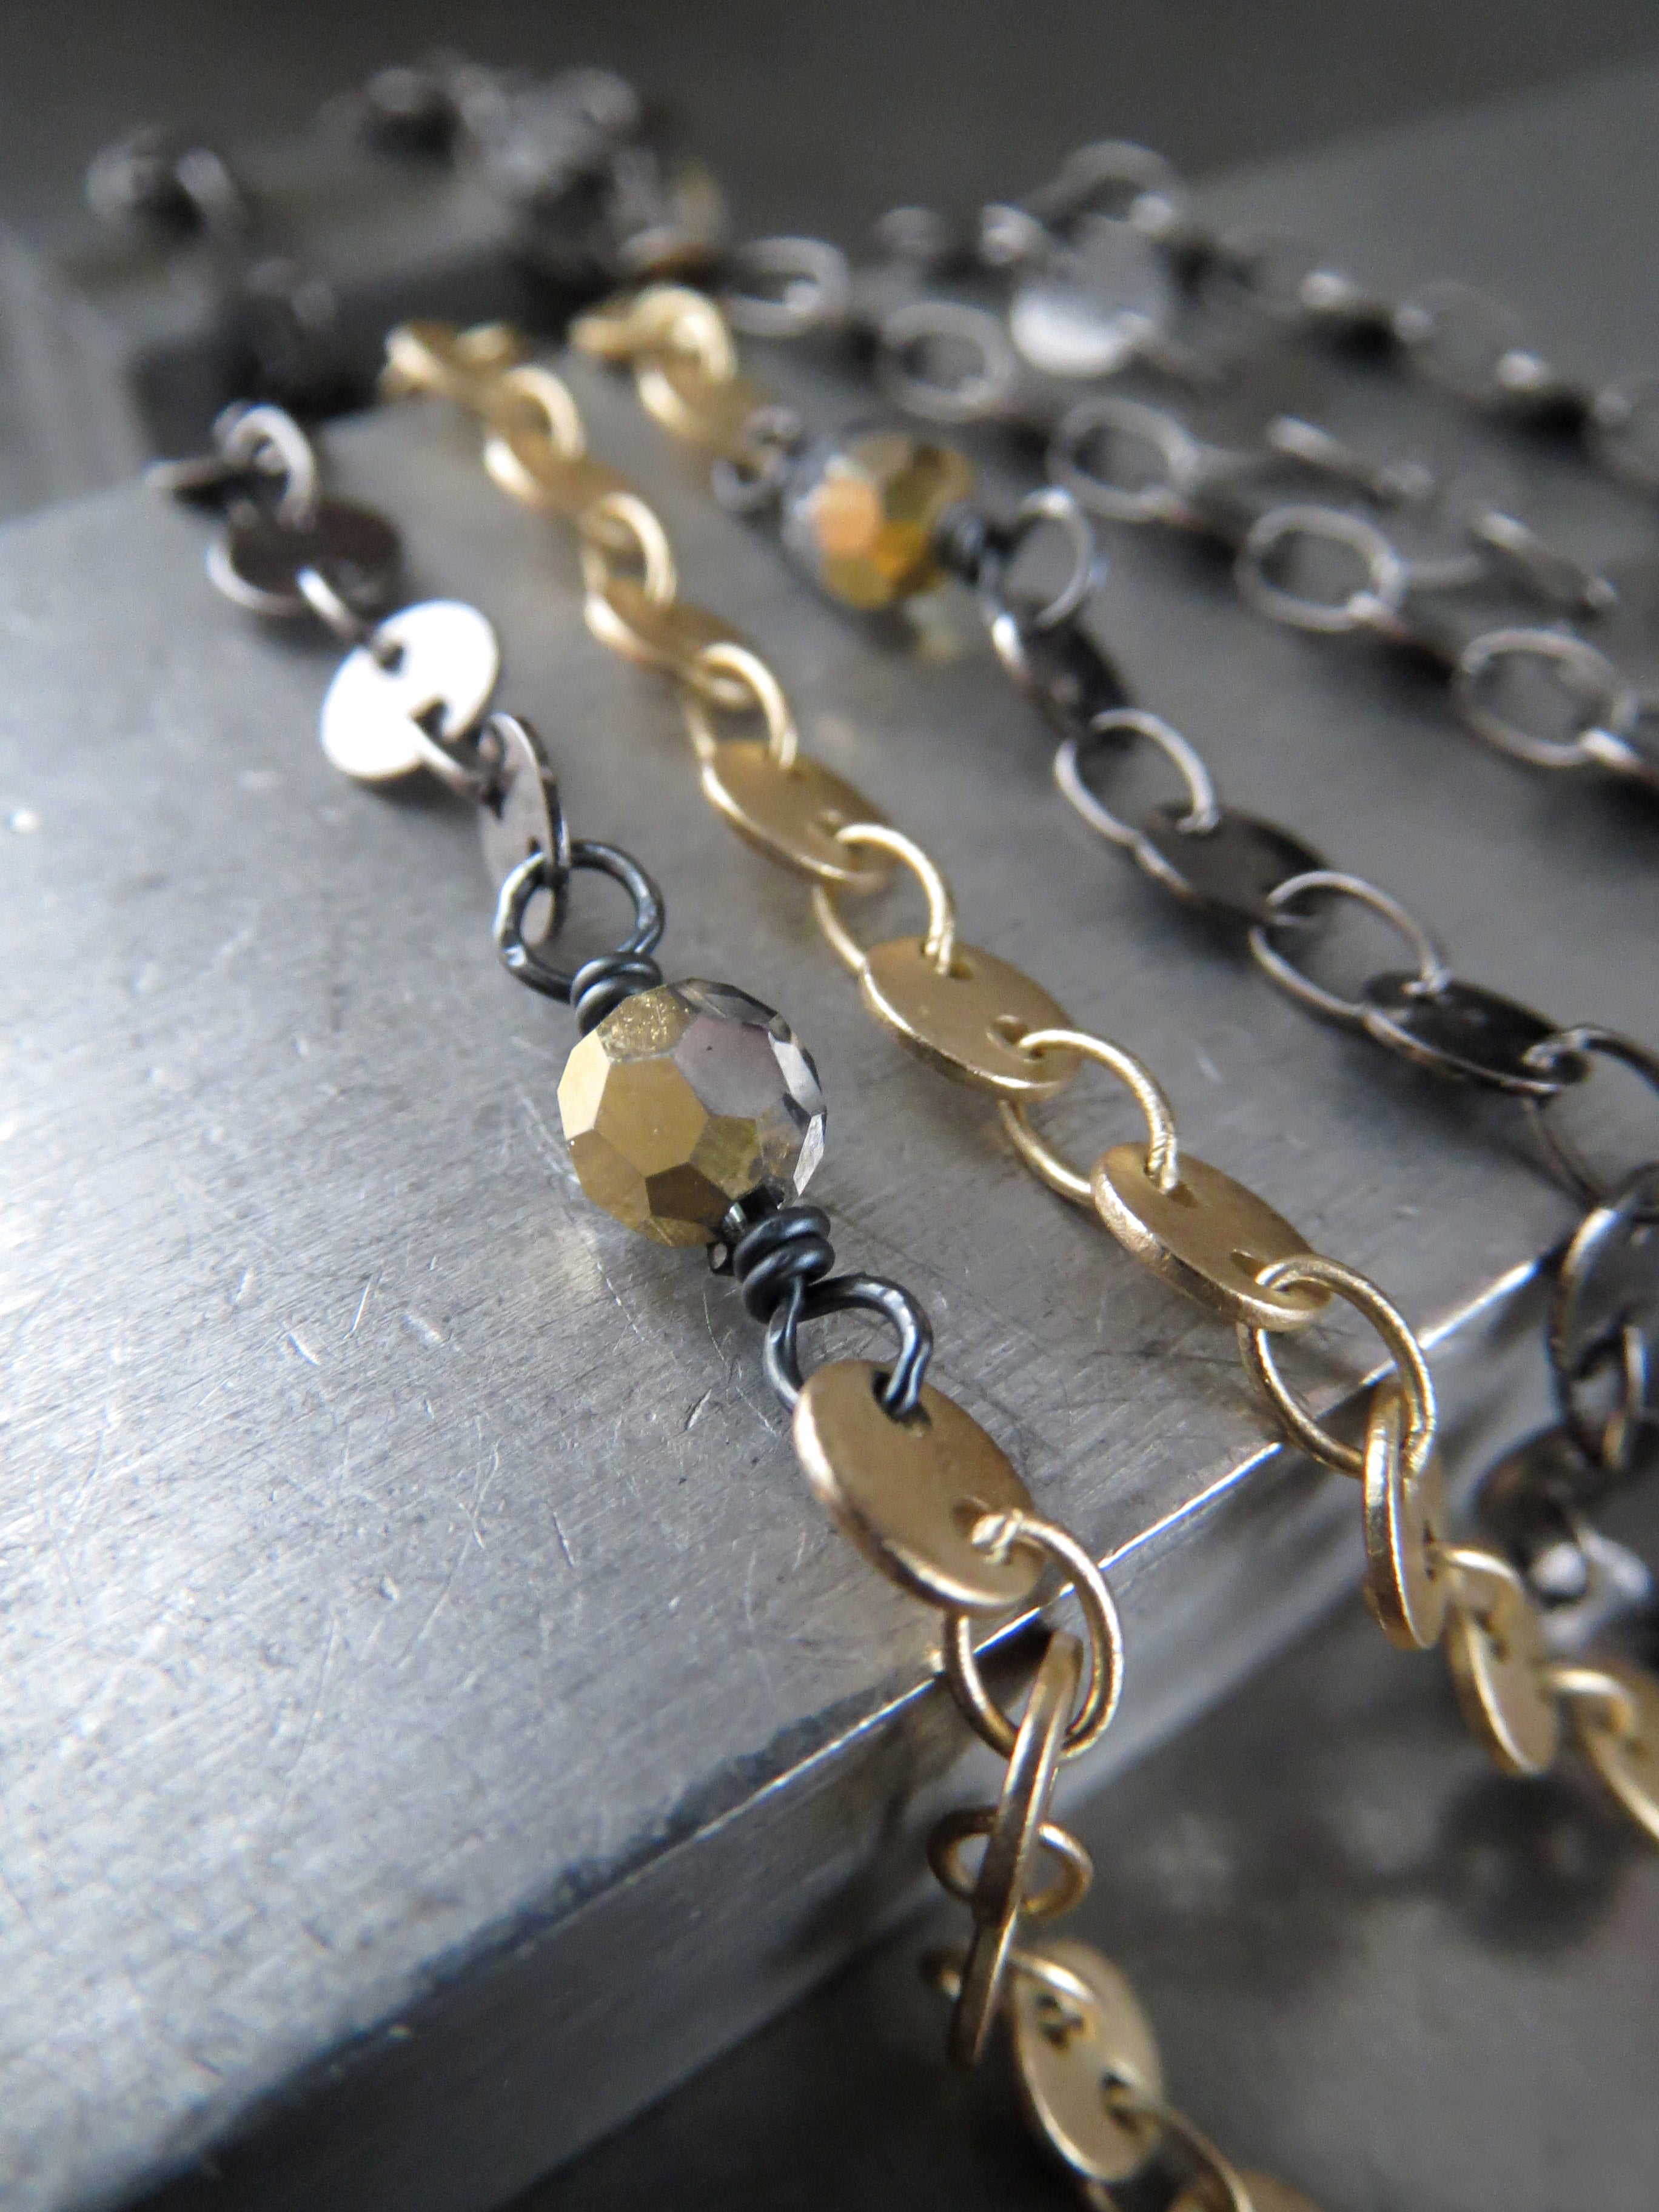 SHIMMER - Ultra Long Necklace in Sparkly Black and Gold Coin Chain